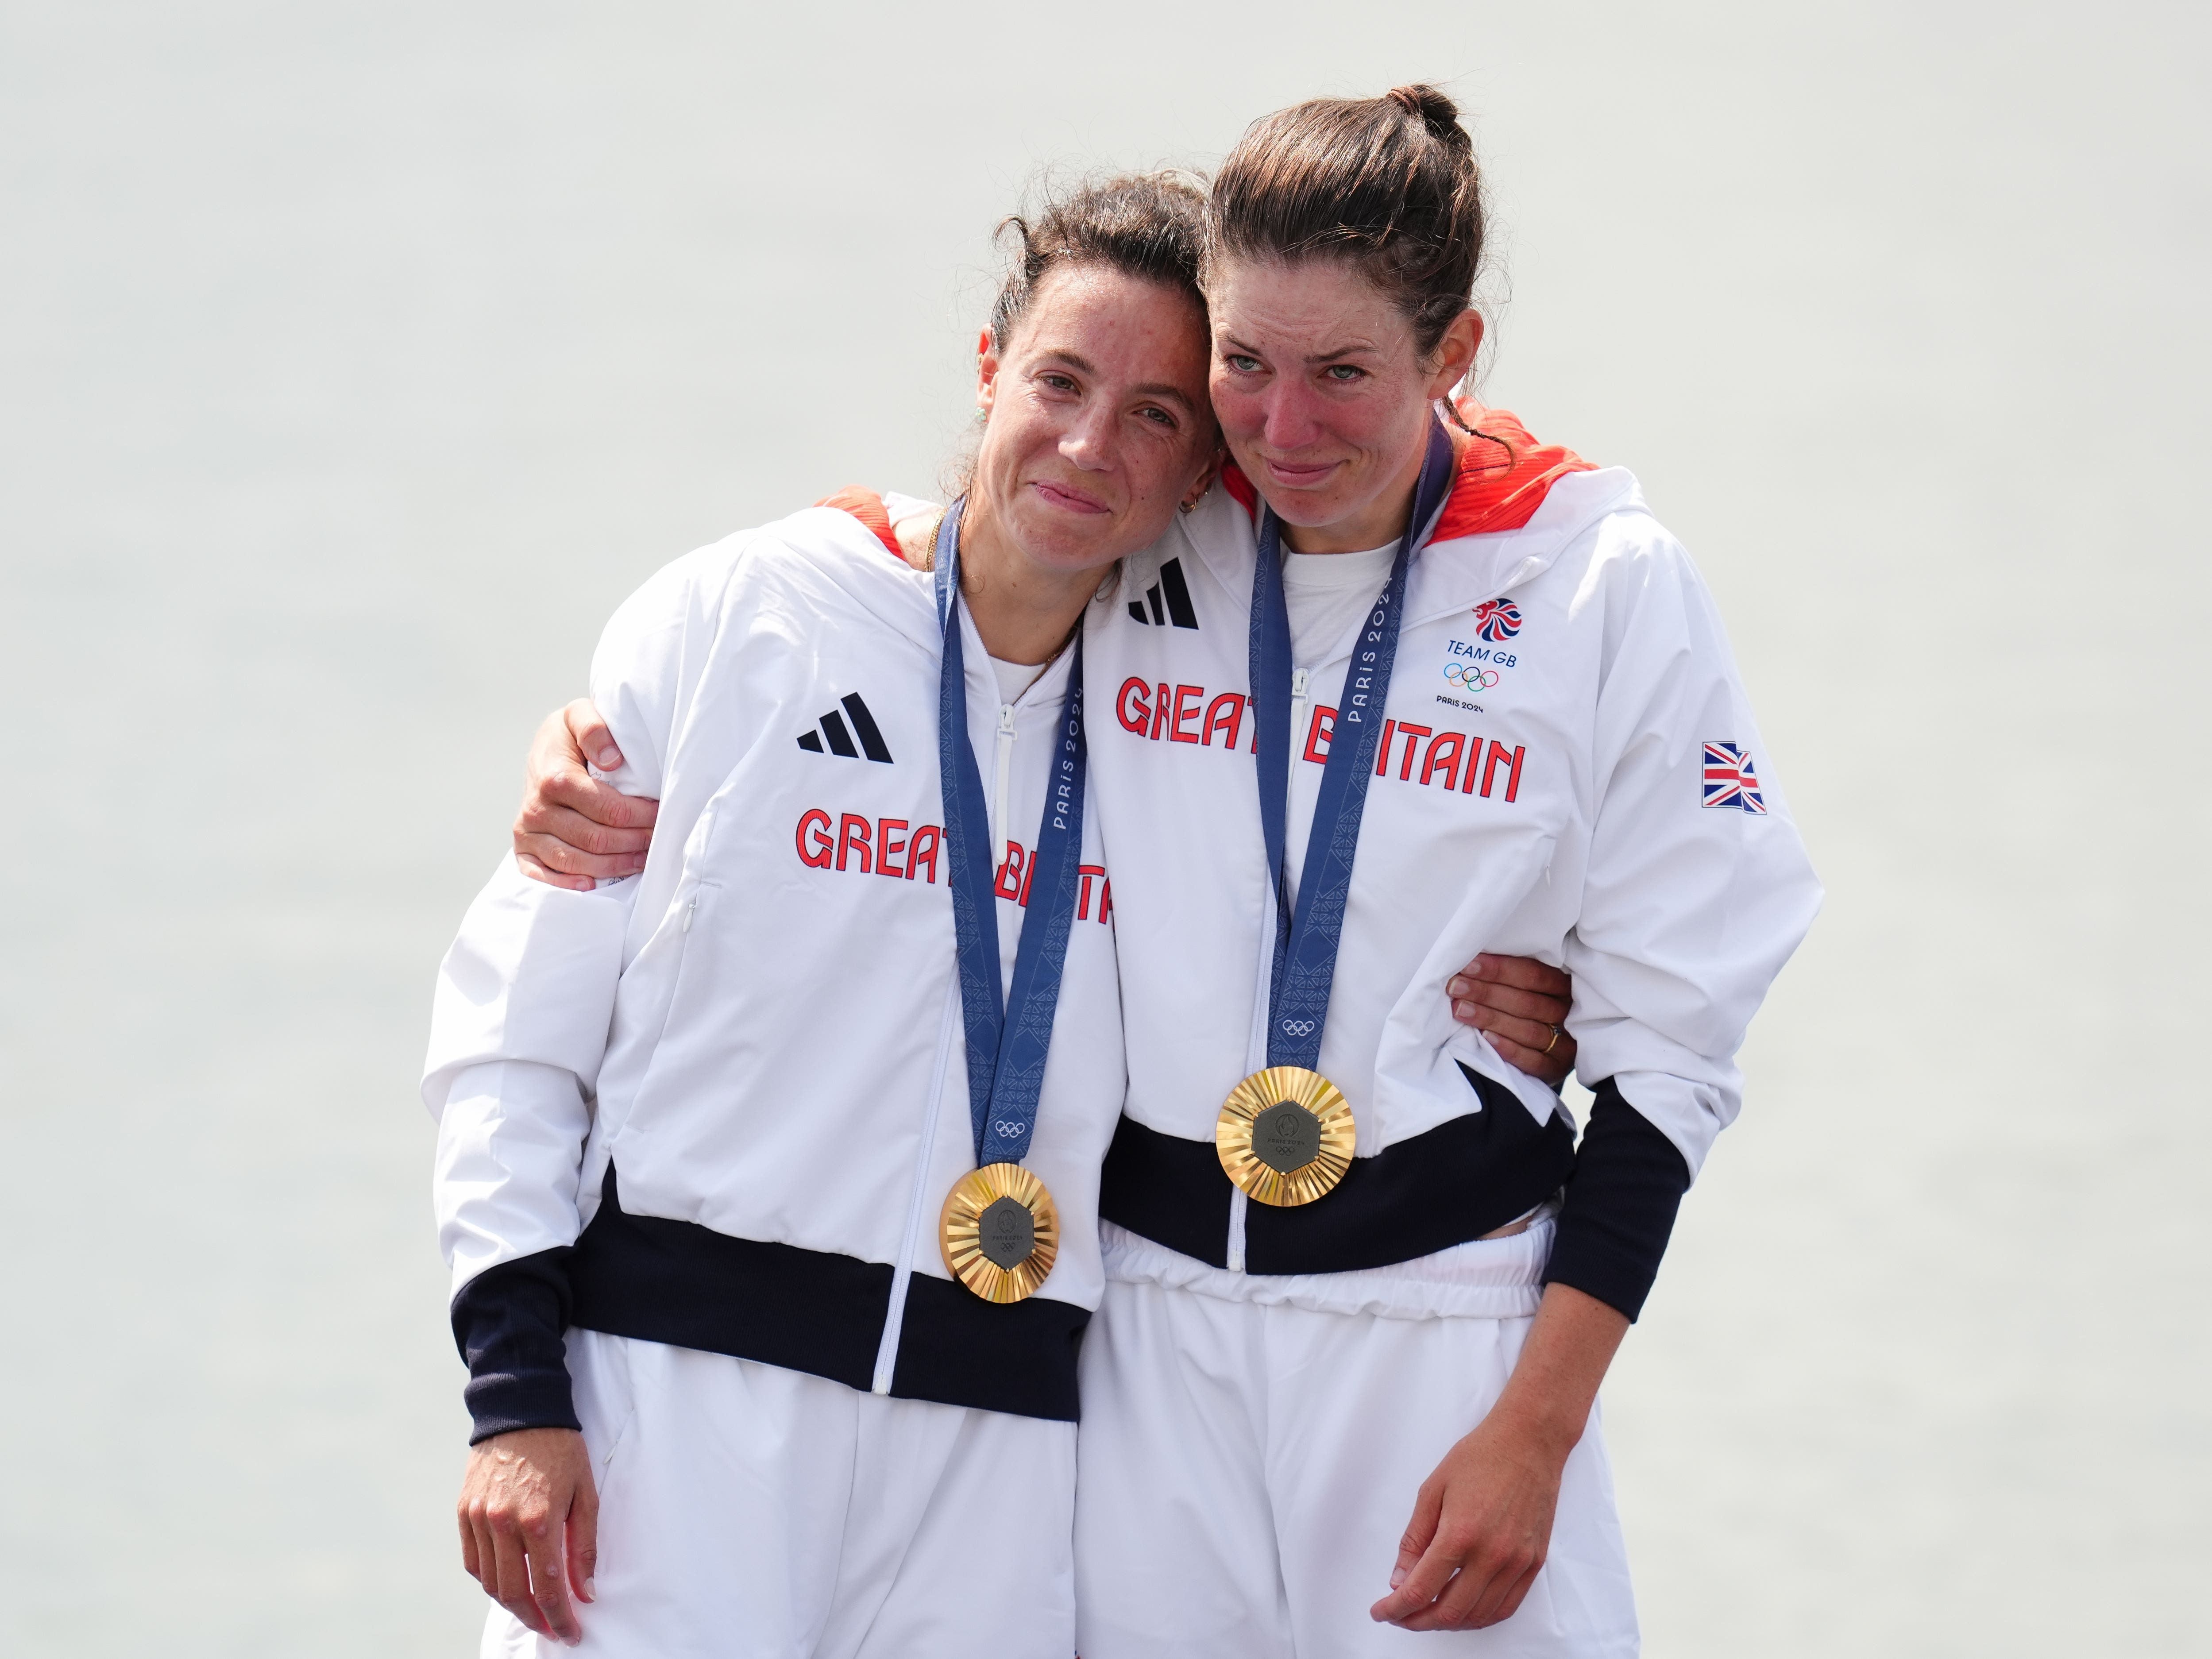 ‘Total, utter joy and elation’ to see daughter secure rowing gold, mother says